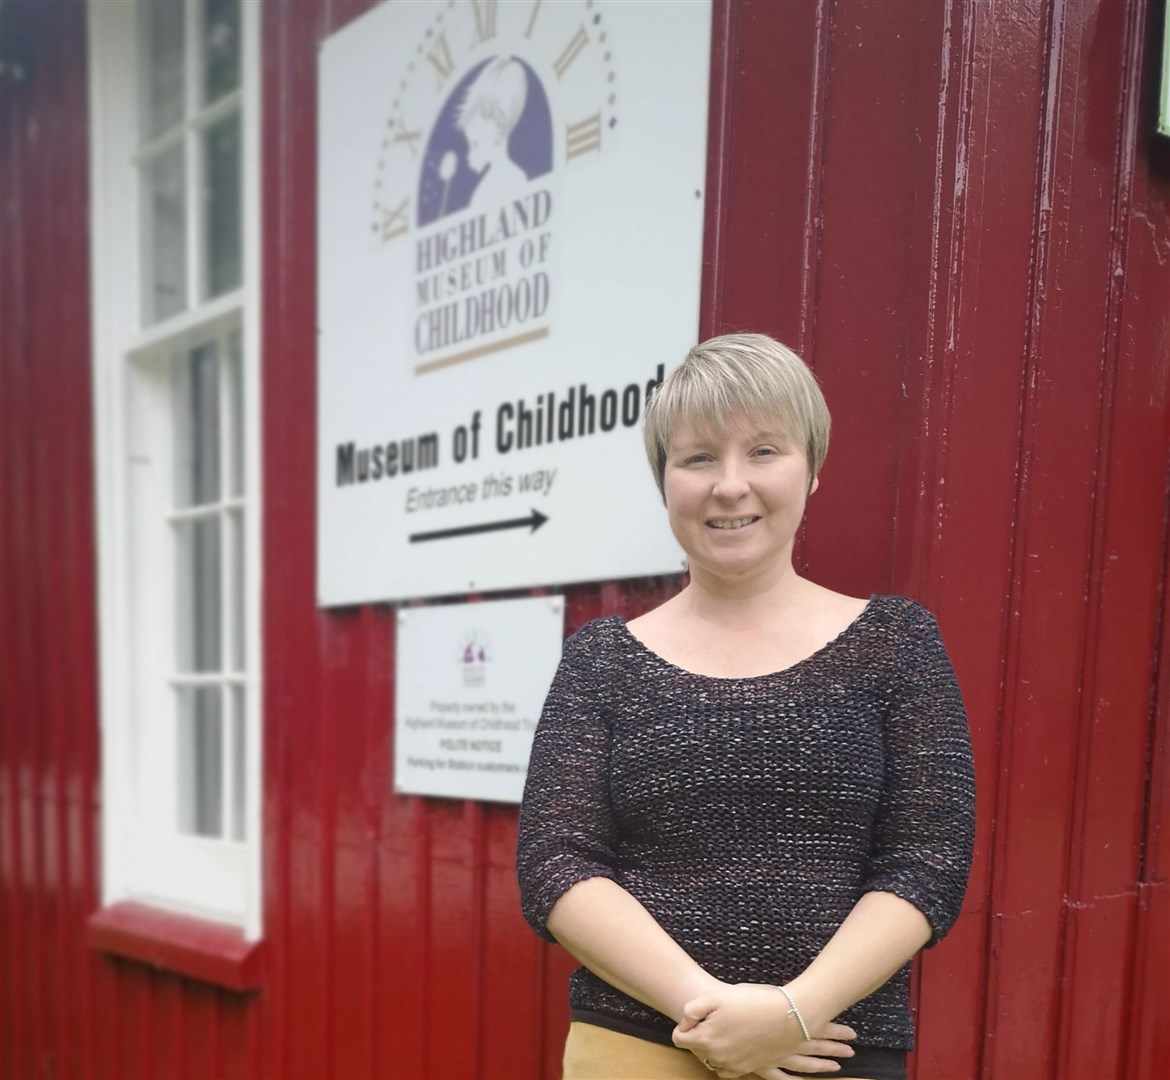 Morven MacDonald from Strathpeffer received a bursary to support her postgraduatemuseum studies course to help her manage and develop the Highland Museum of Childhood.